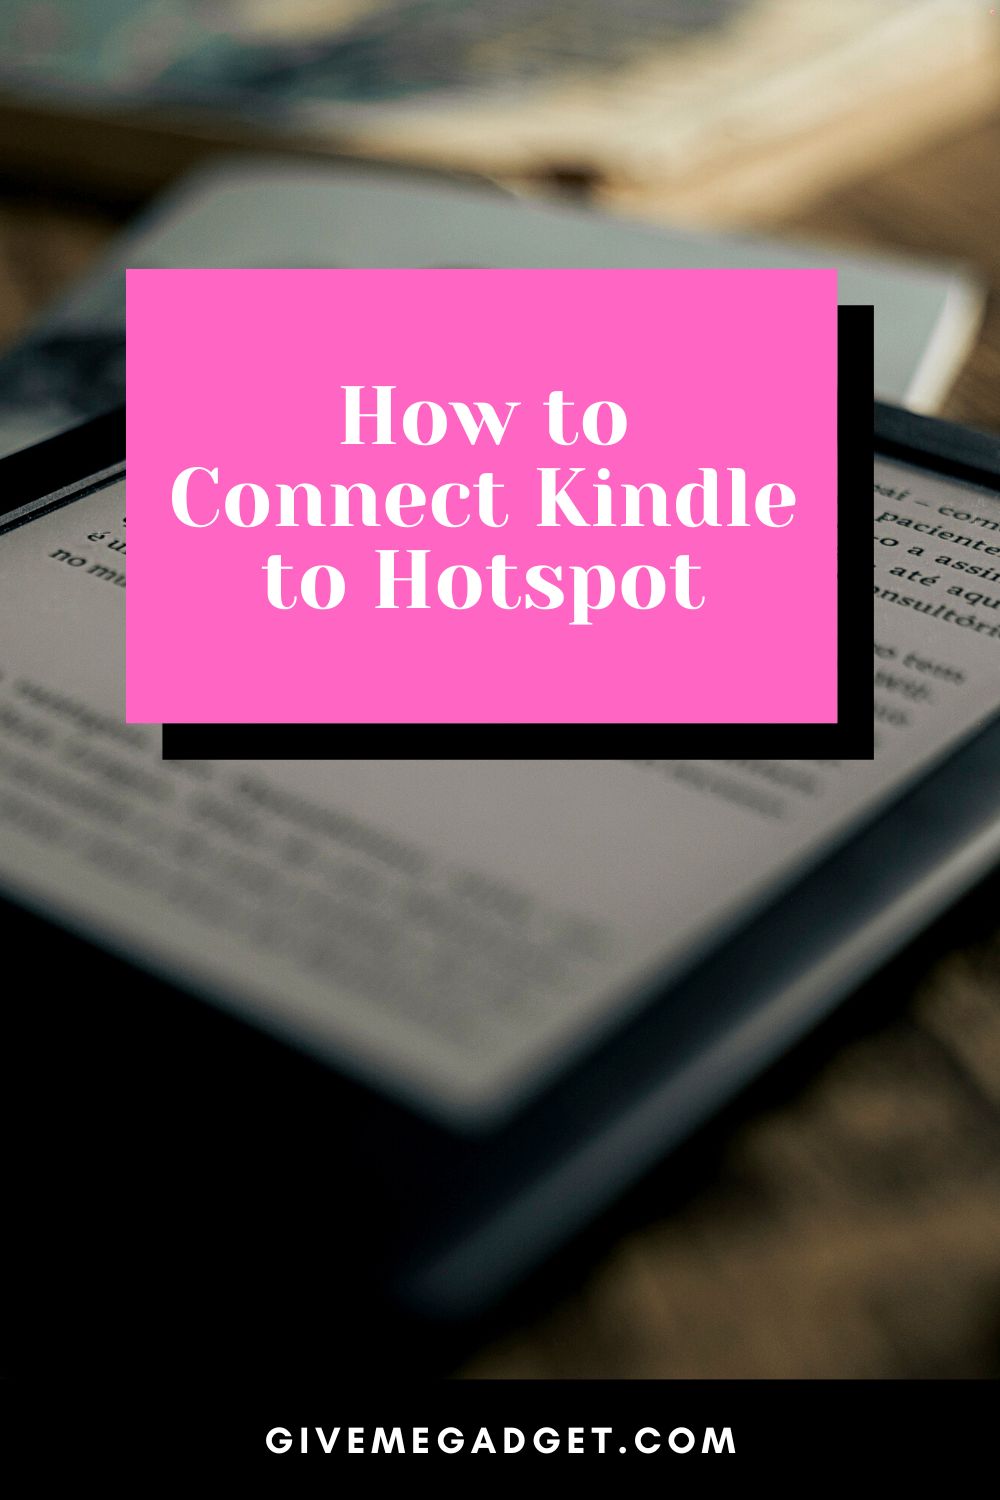 How to Connect Kindle to Hotspot